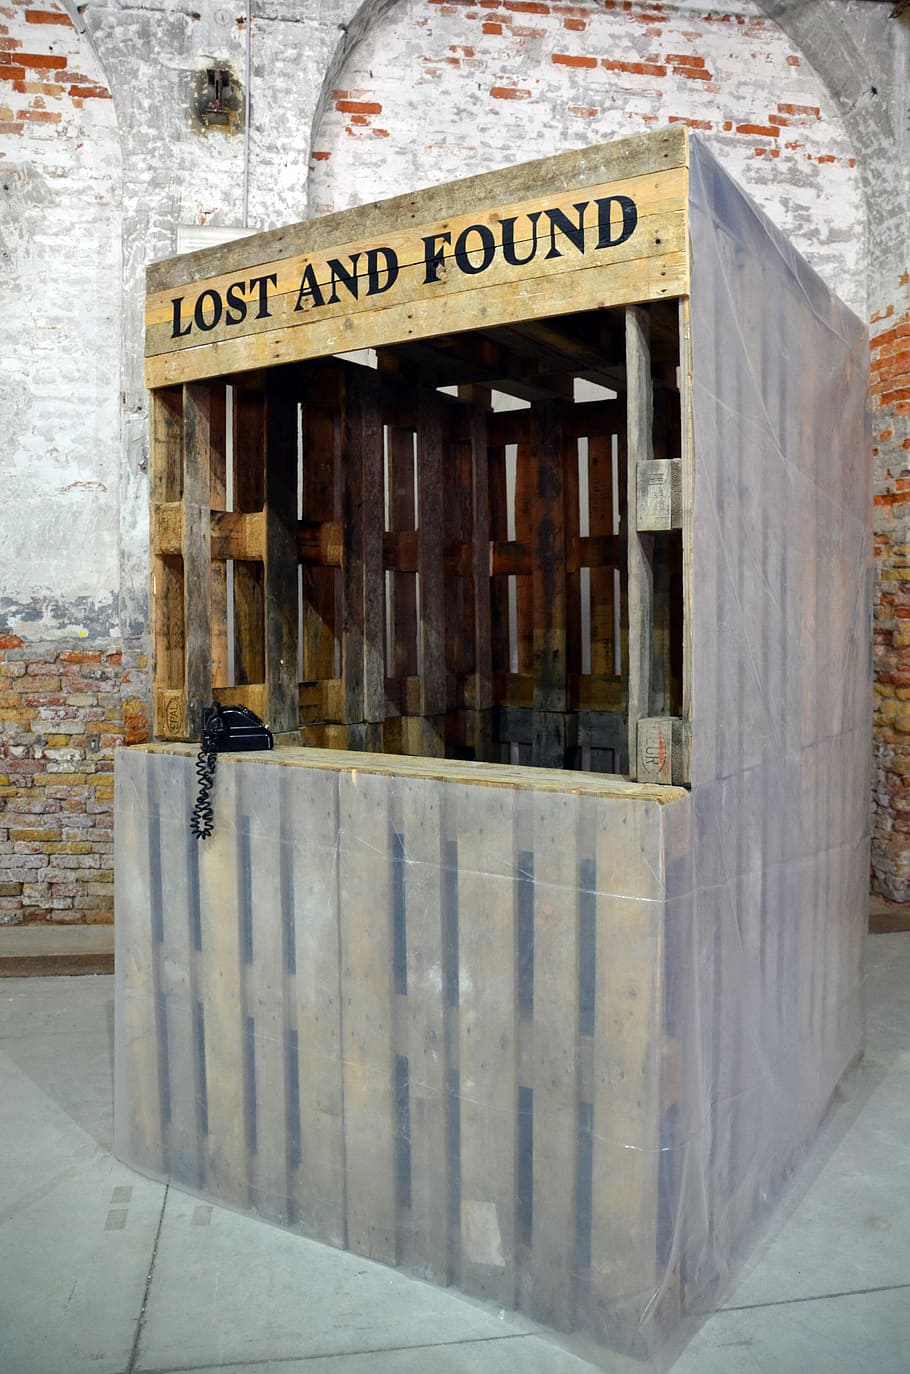 fund office, lose, to find, art, art installation, fetch, biennale, wooden crate, crate, pallet